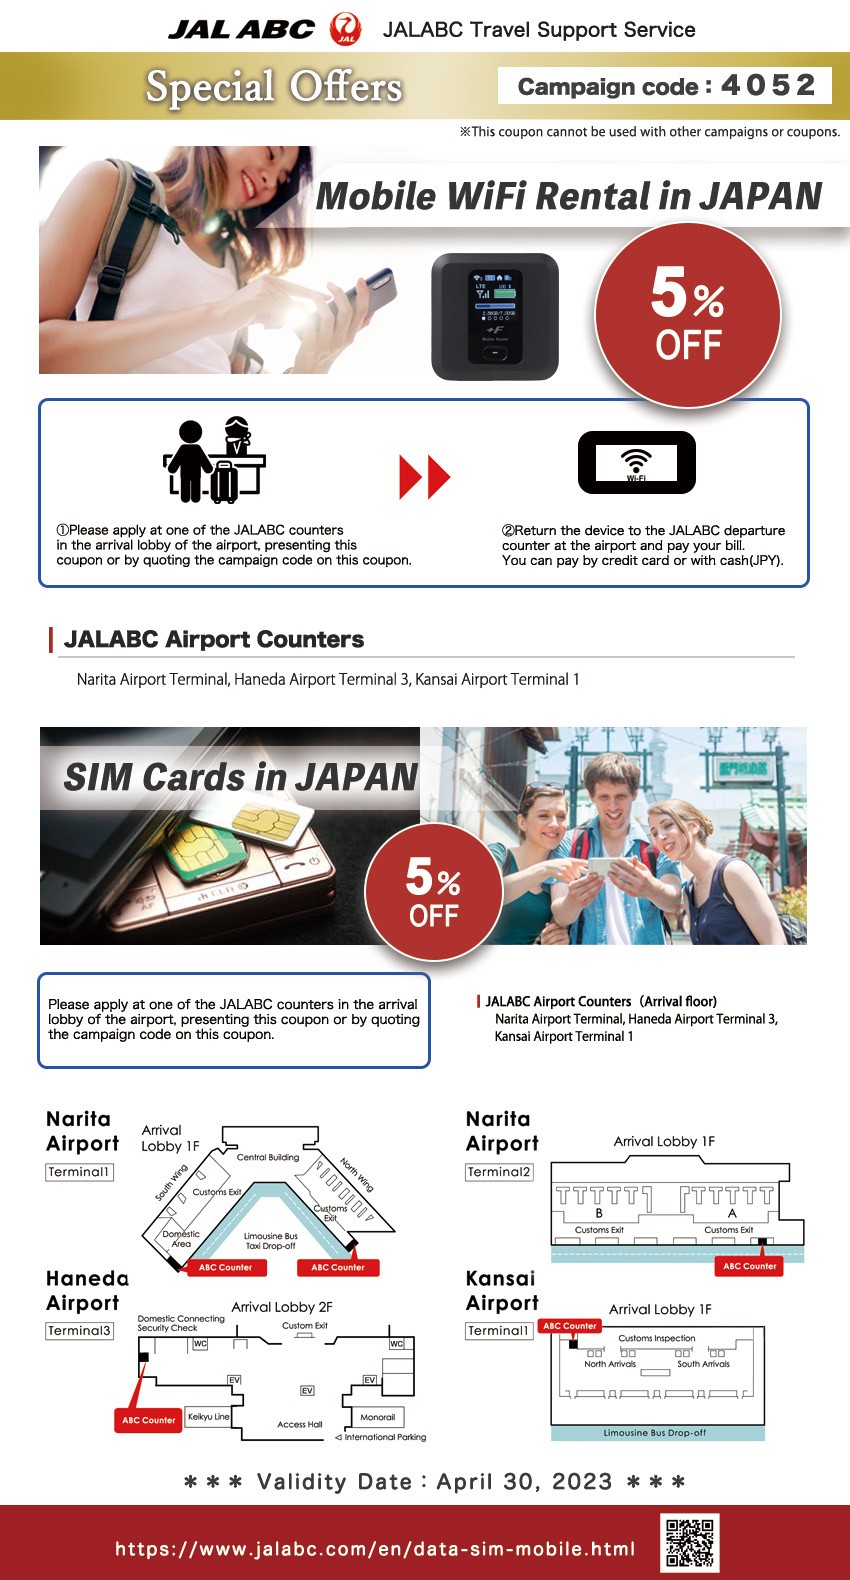 Luggage Delivery, Wi-Fi Rental, and SIM Services all Cheaper than Ever - The Brand New JAL ABC Coupon Usable at All Major Japanese Airports!